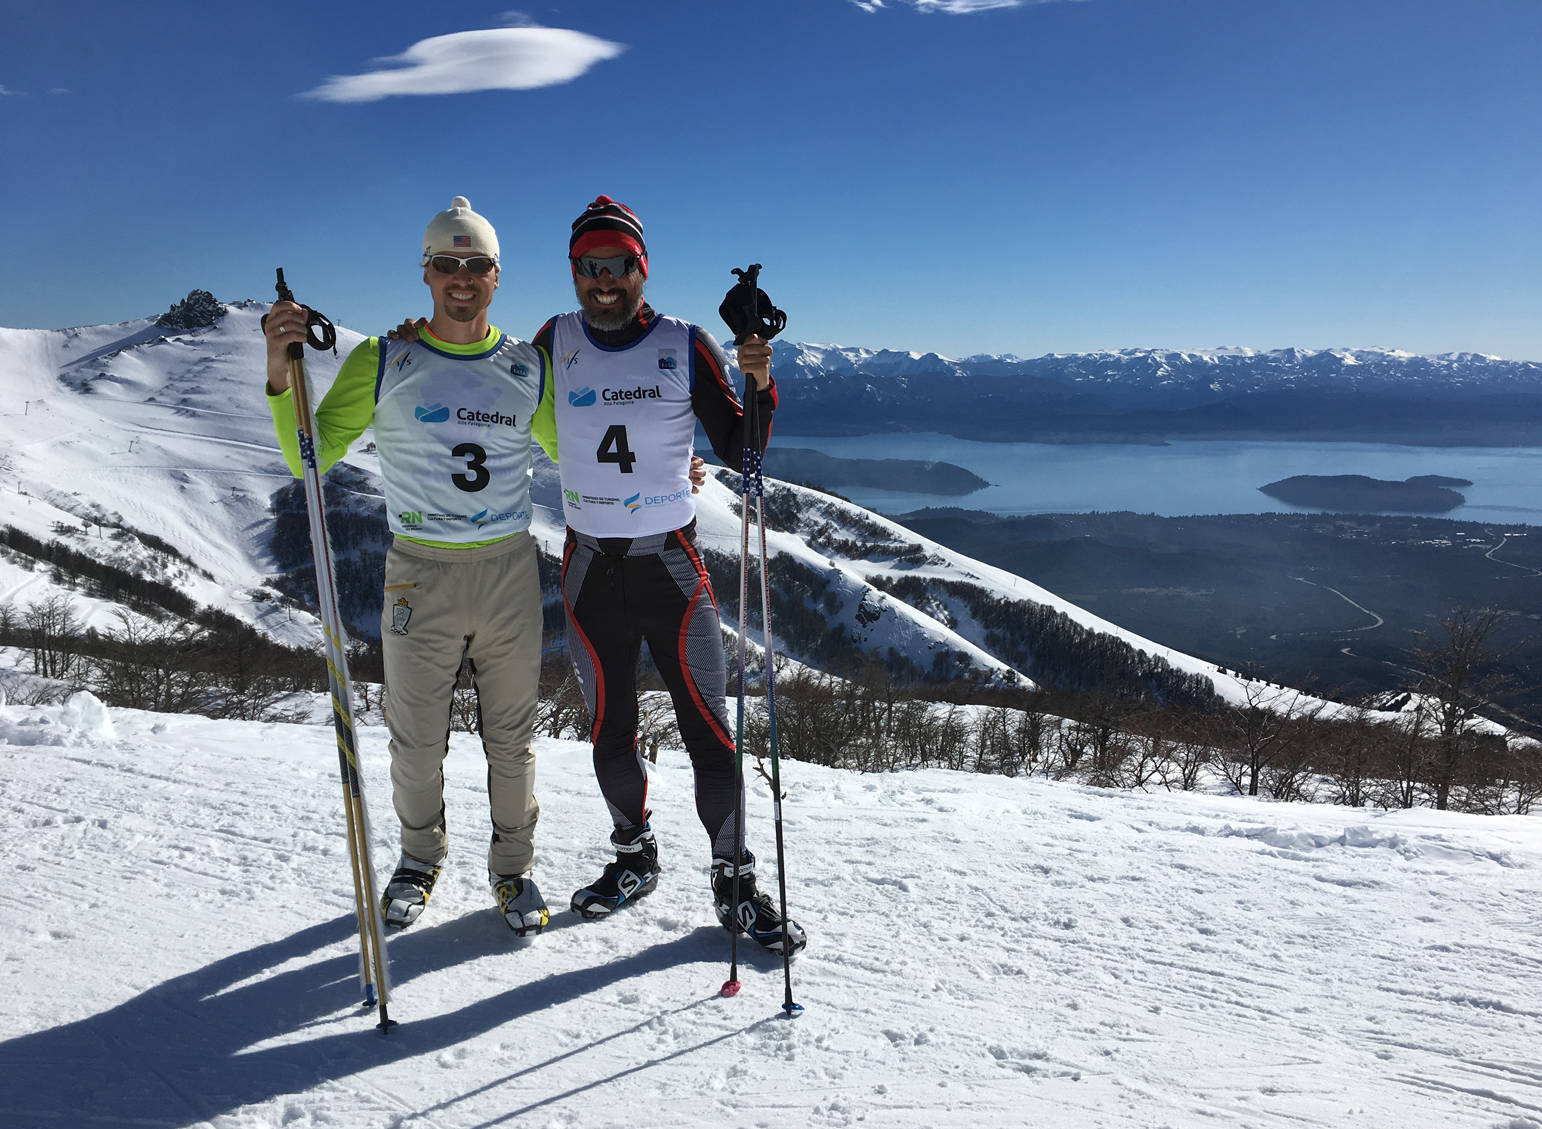 Andy Liebner, a 2001 Soldotna High School graduate, and German Madrazo, a Mexican Olympic cross-country skier coached by Liebner, stand together at FIS races in Cerro Catedral, Argentina, in September 2017. (Photo provided by Andy Liebner)